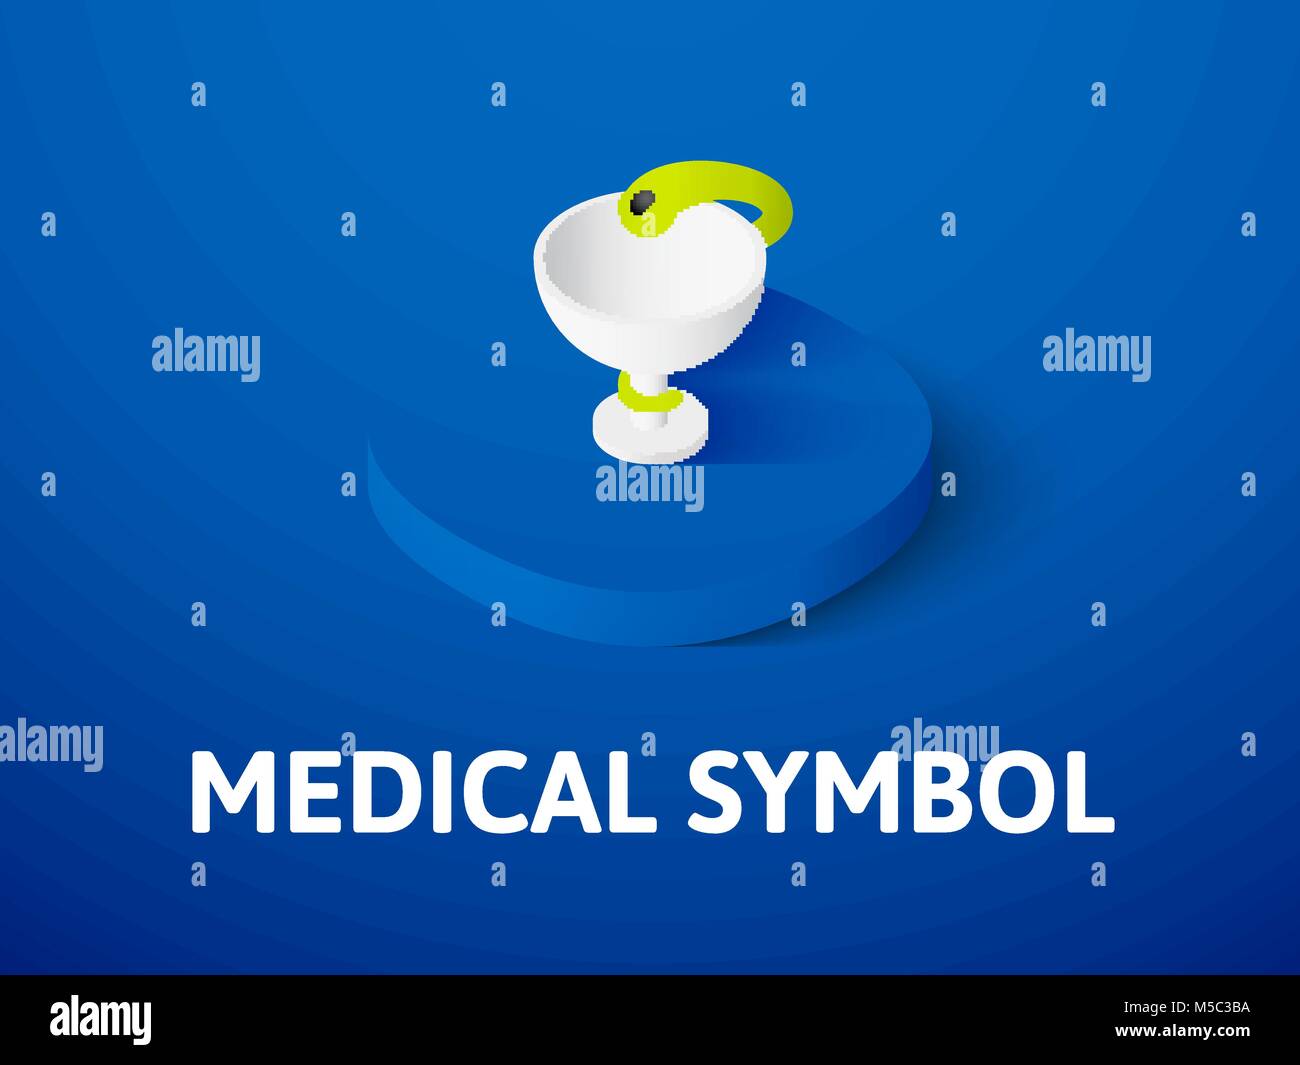 Medical symbol isometric icon, isolated on color background Stock Vector